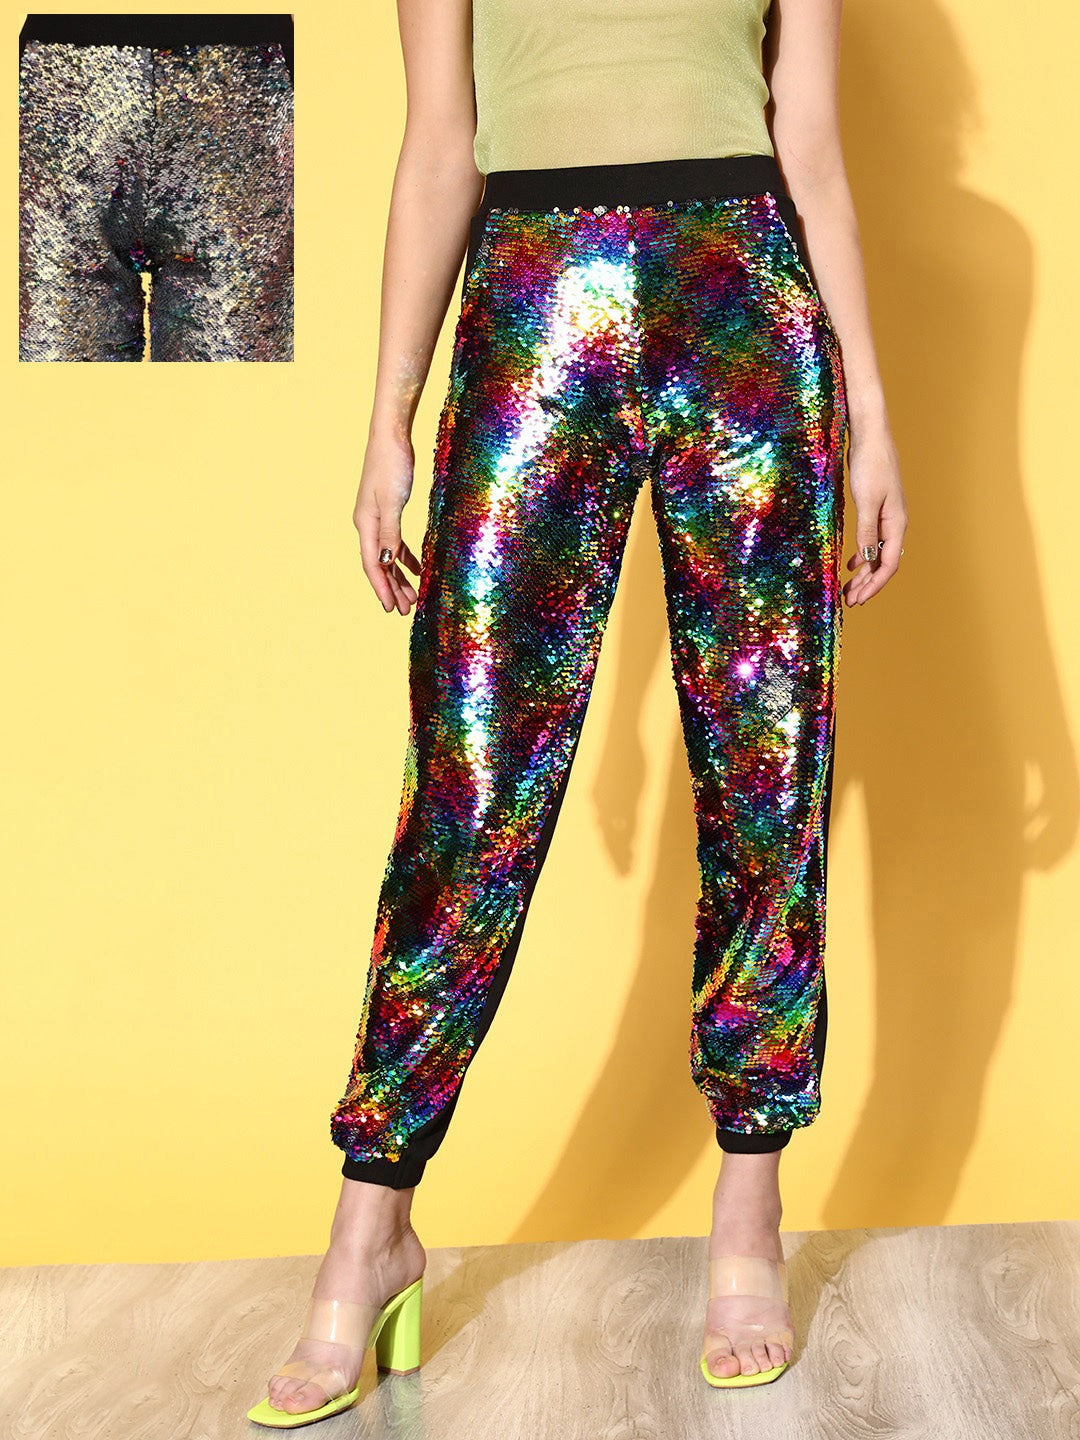 NaaNaa high waisted sequin pants in burgundy part of a set  ASOS